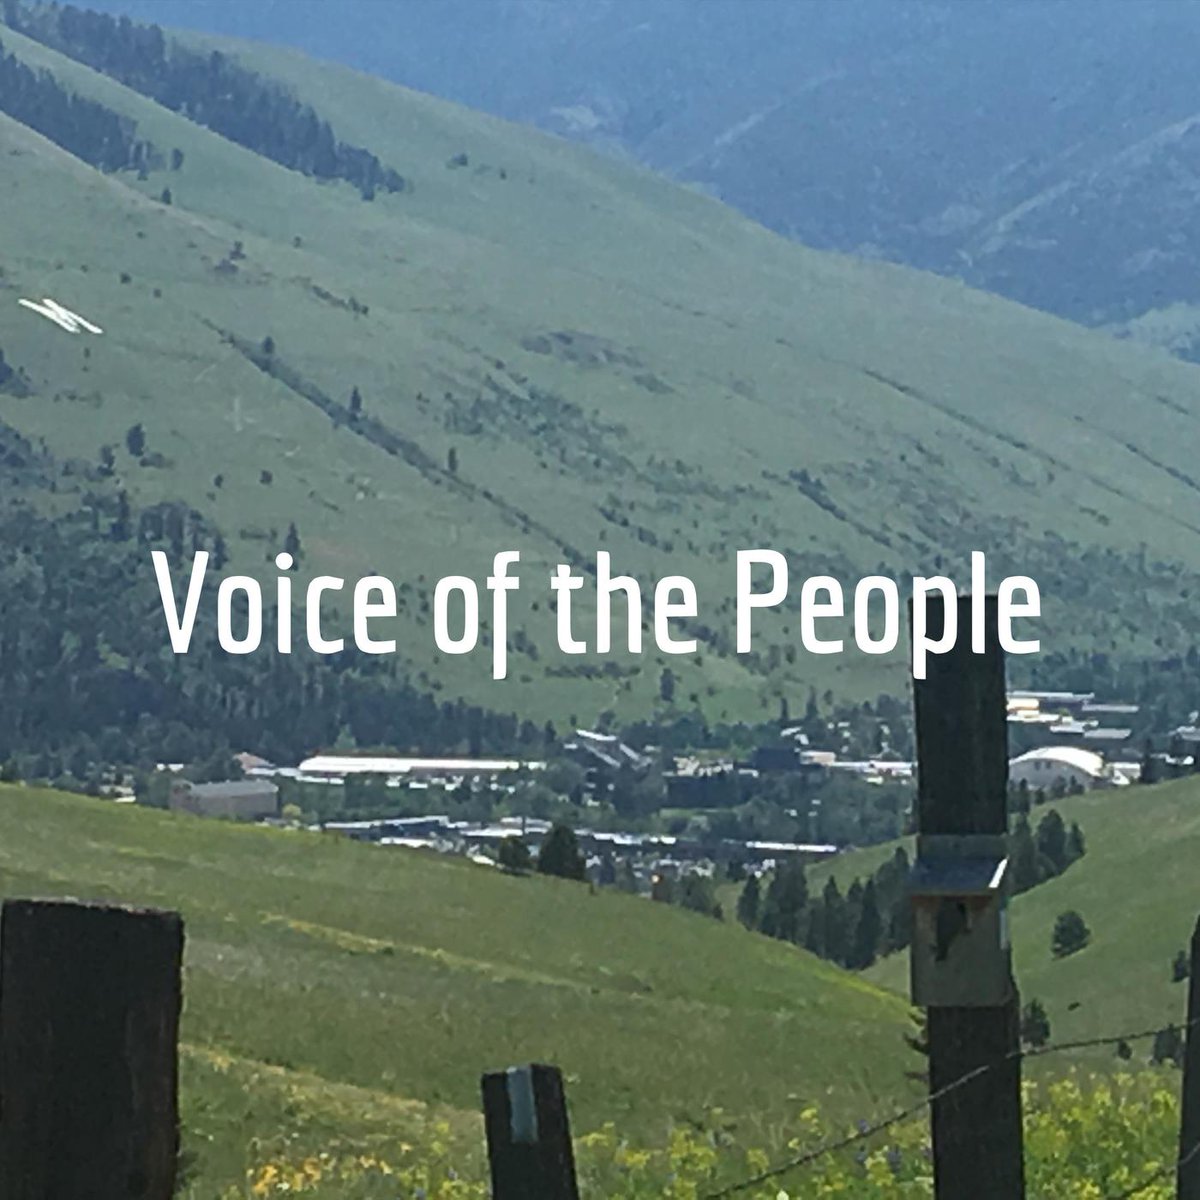 Voice of the People goes on the air at 1:00 Mountain Time on 105.5 KFGM in Missoula MT. Listen live at tunein.com/radio/Missoula… Looking for more podcasts & radio shows that talk about working people's issues? Visit laborradionetwork.org #1u #UnionStrong #LaborRadioPod